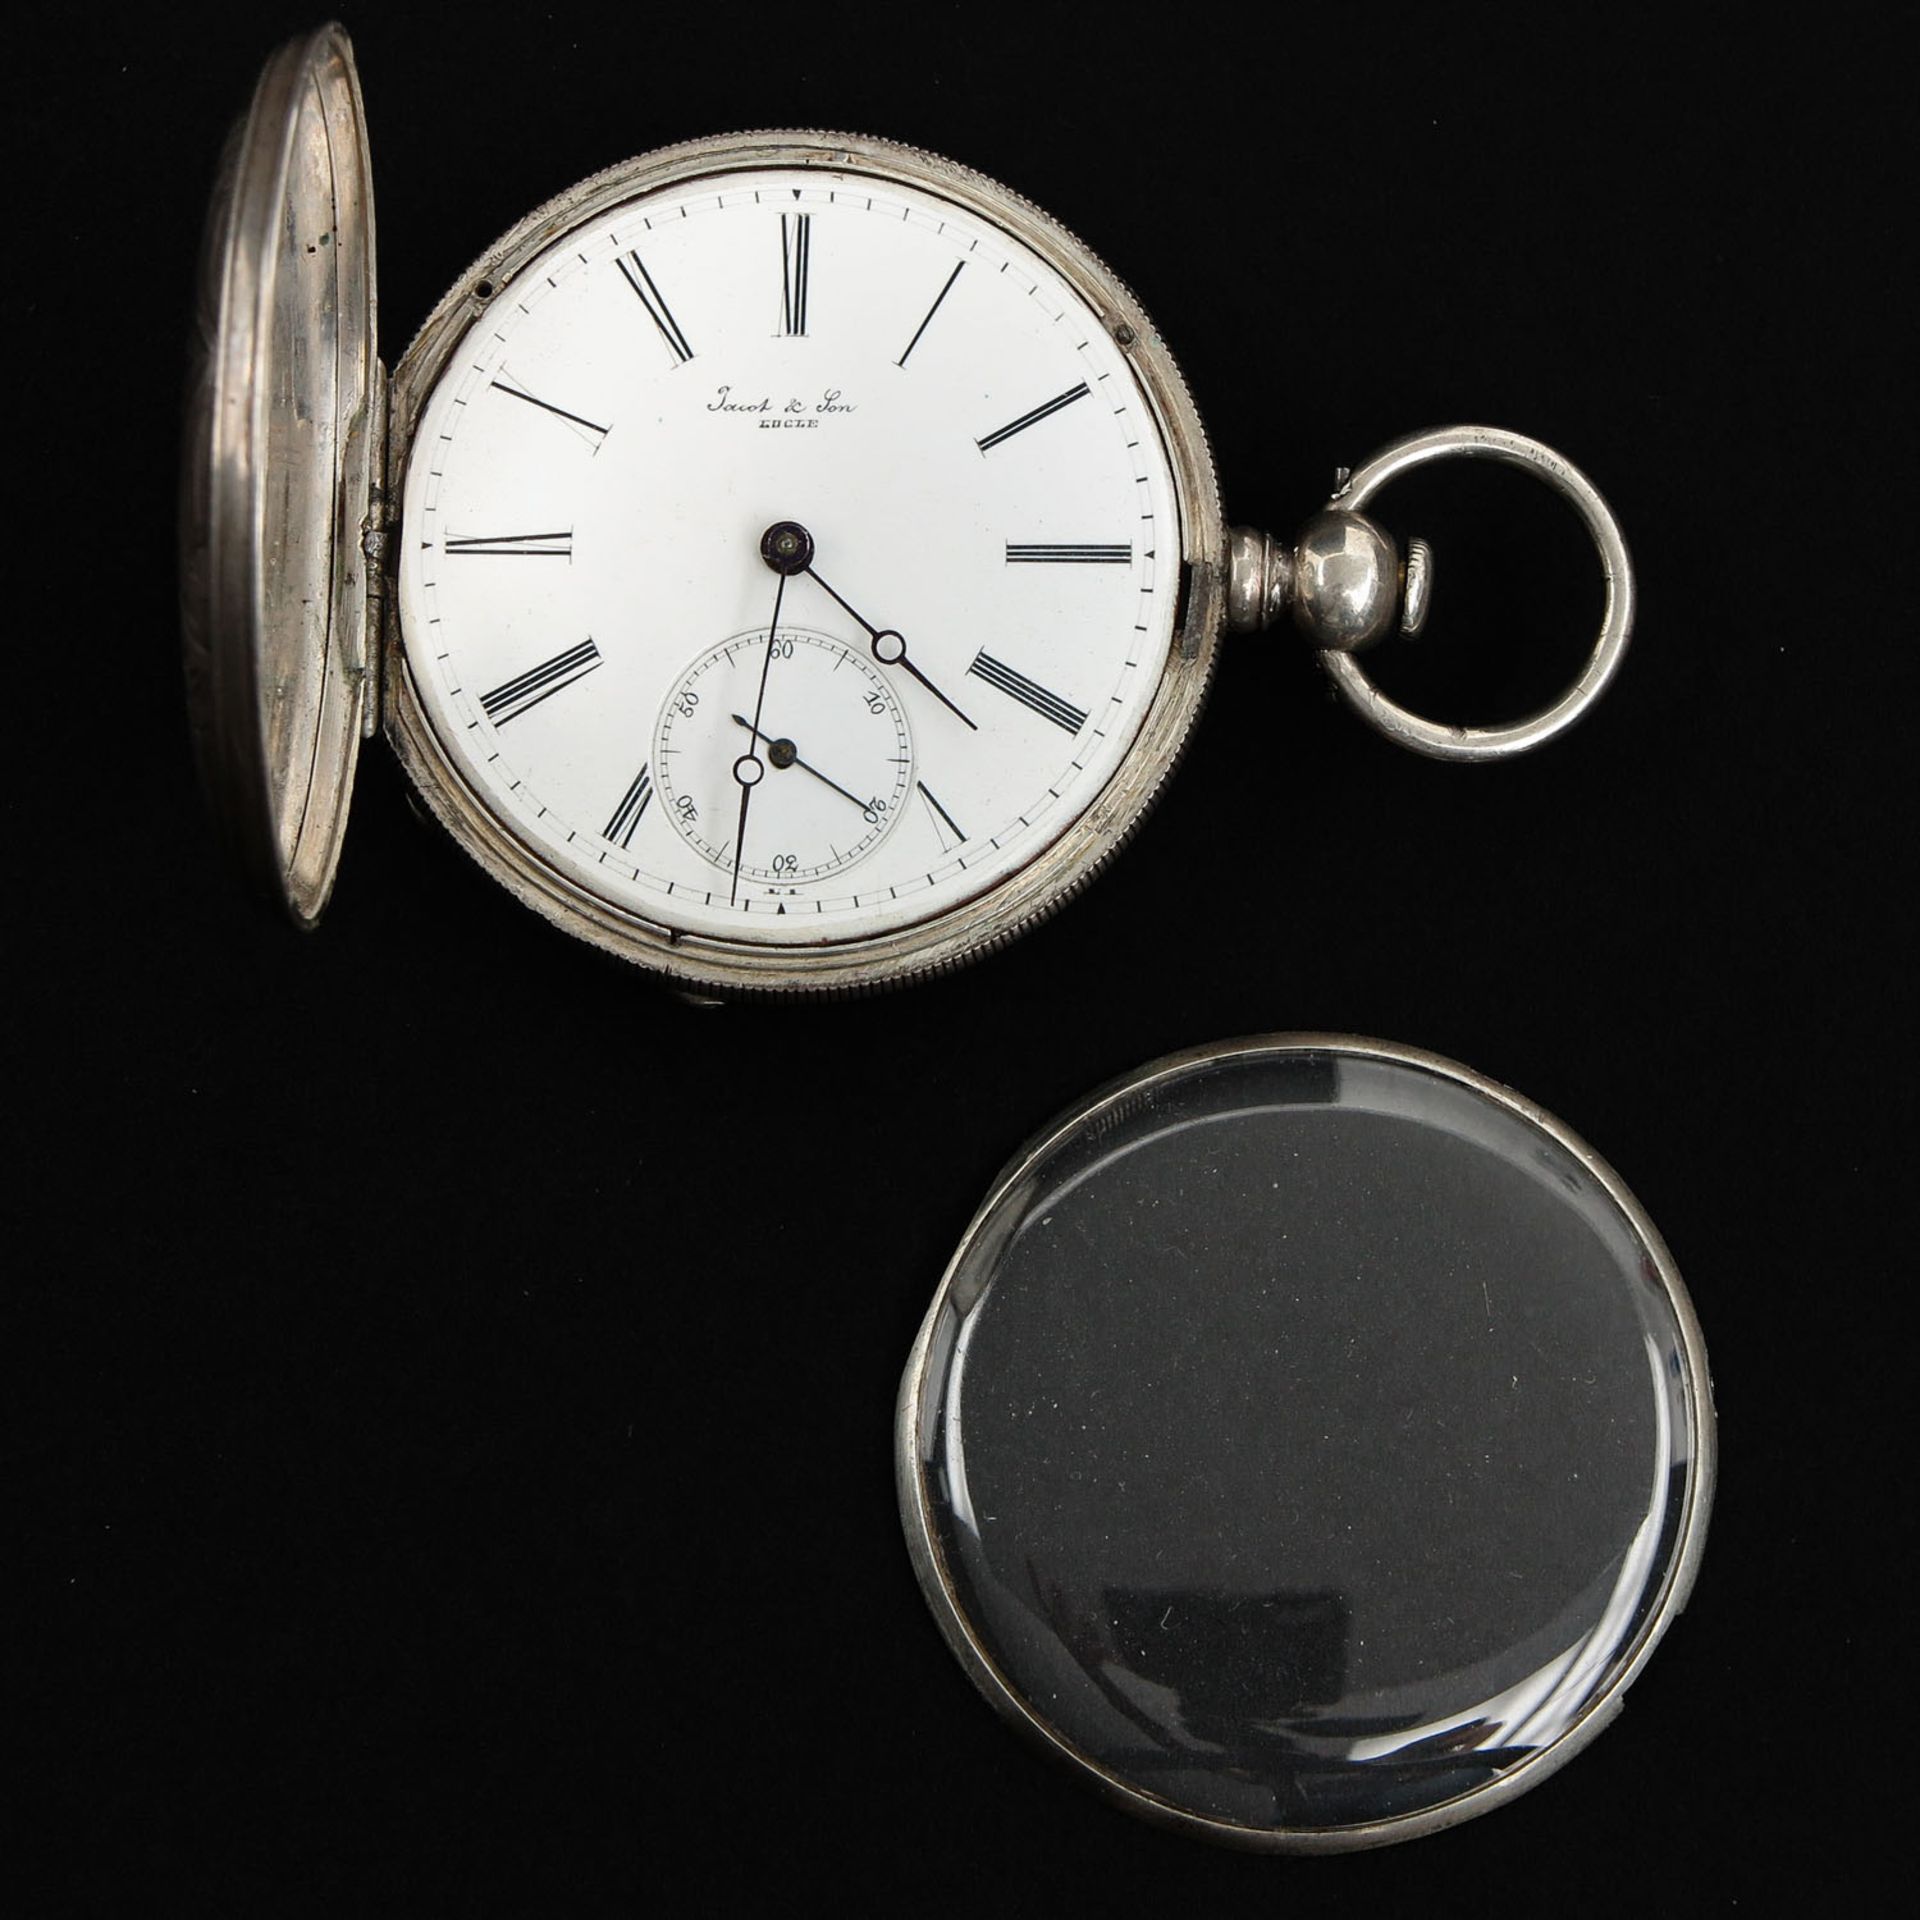 A Pocket Watch by Jacot & Son - Image 4 of 8